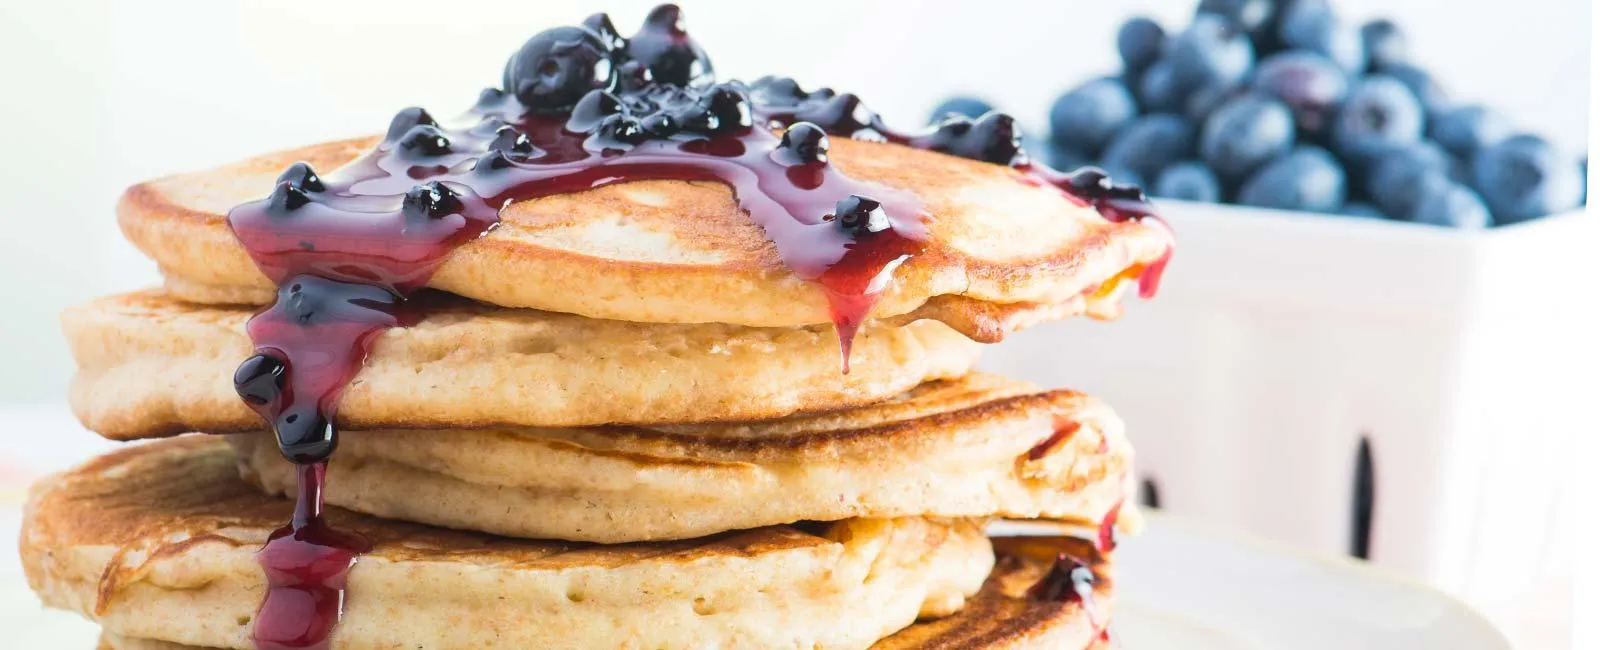 Whole Wheat Blueberry Pancakes with Blueberry Grape Compote